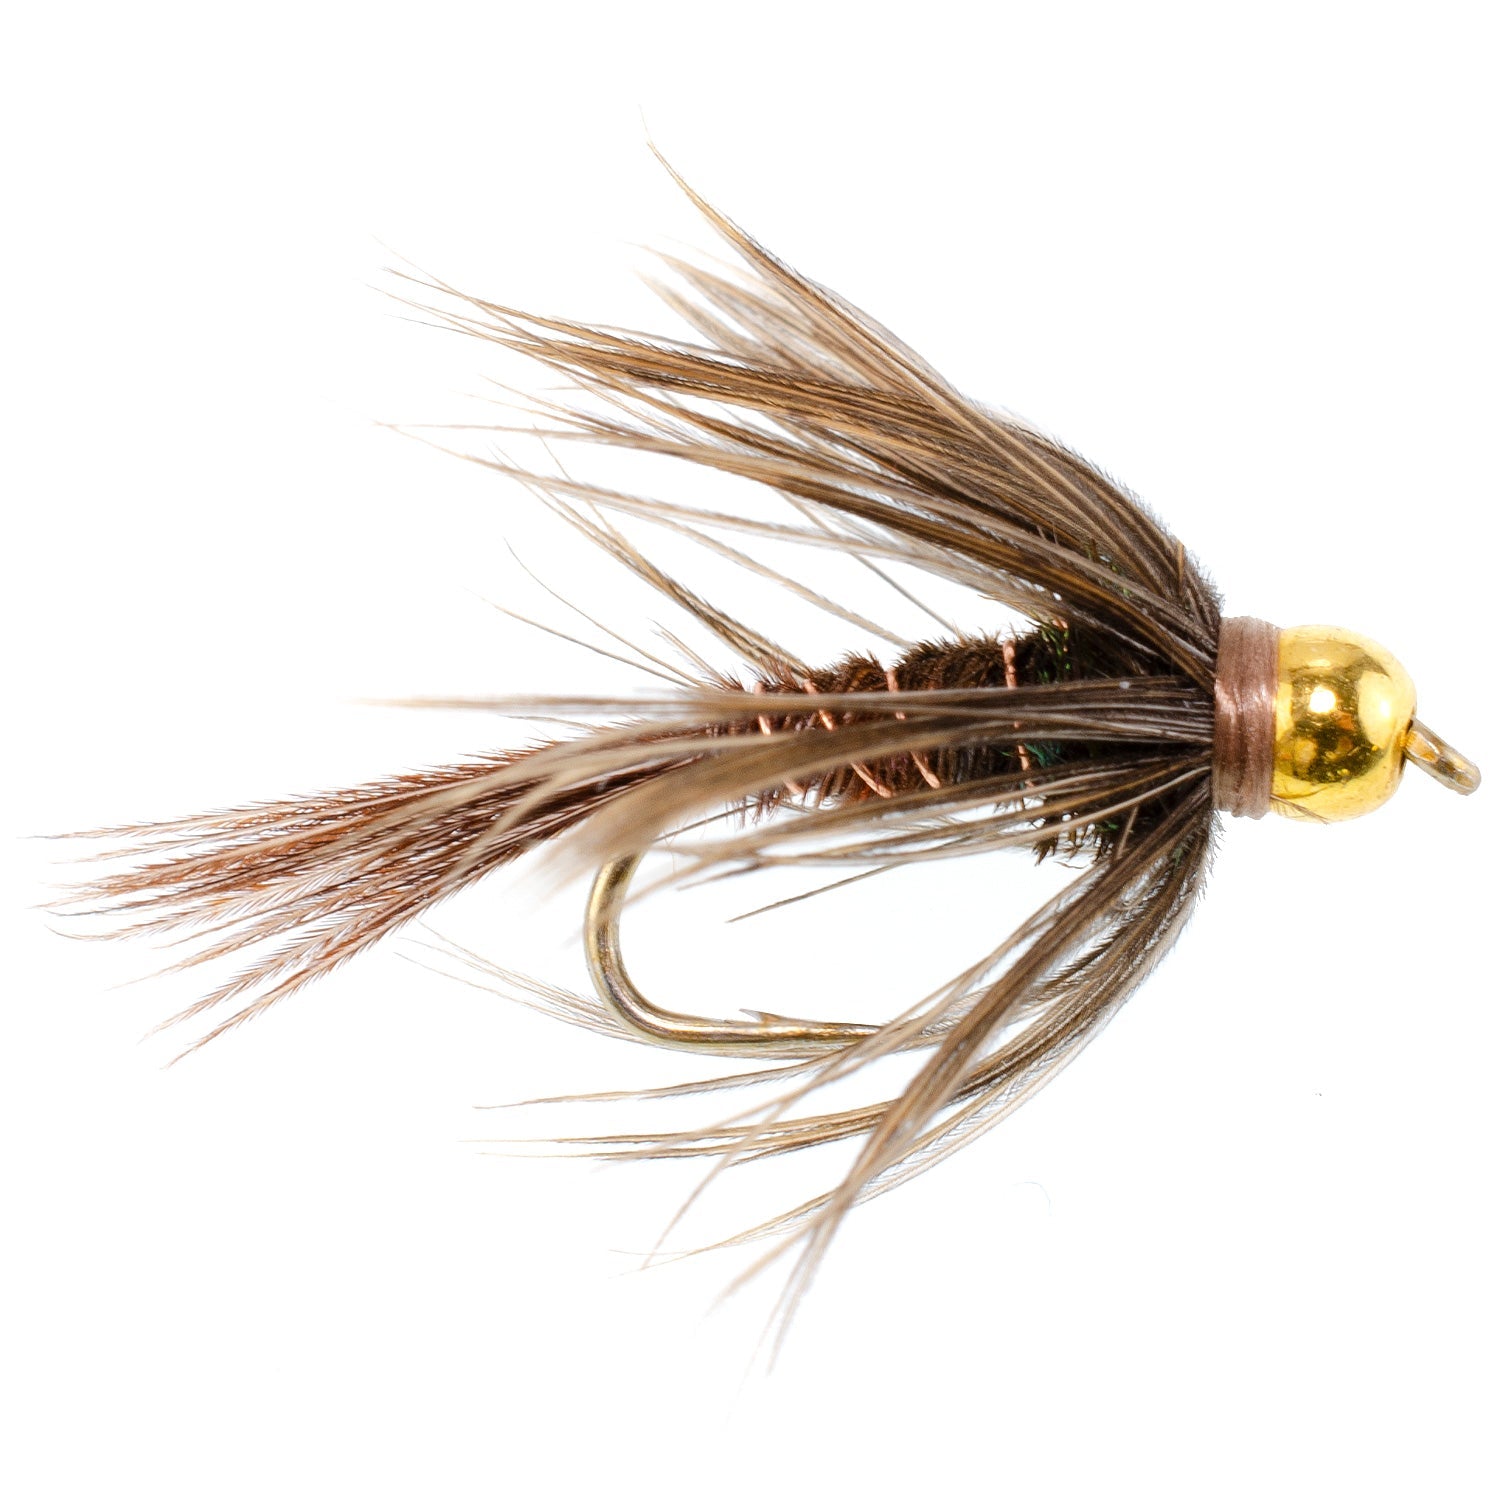 Soft Hackle Bead Head Pheasant Tail Nymph Fly Fishing Flies - 6 Flies Hook Size 14